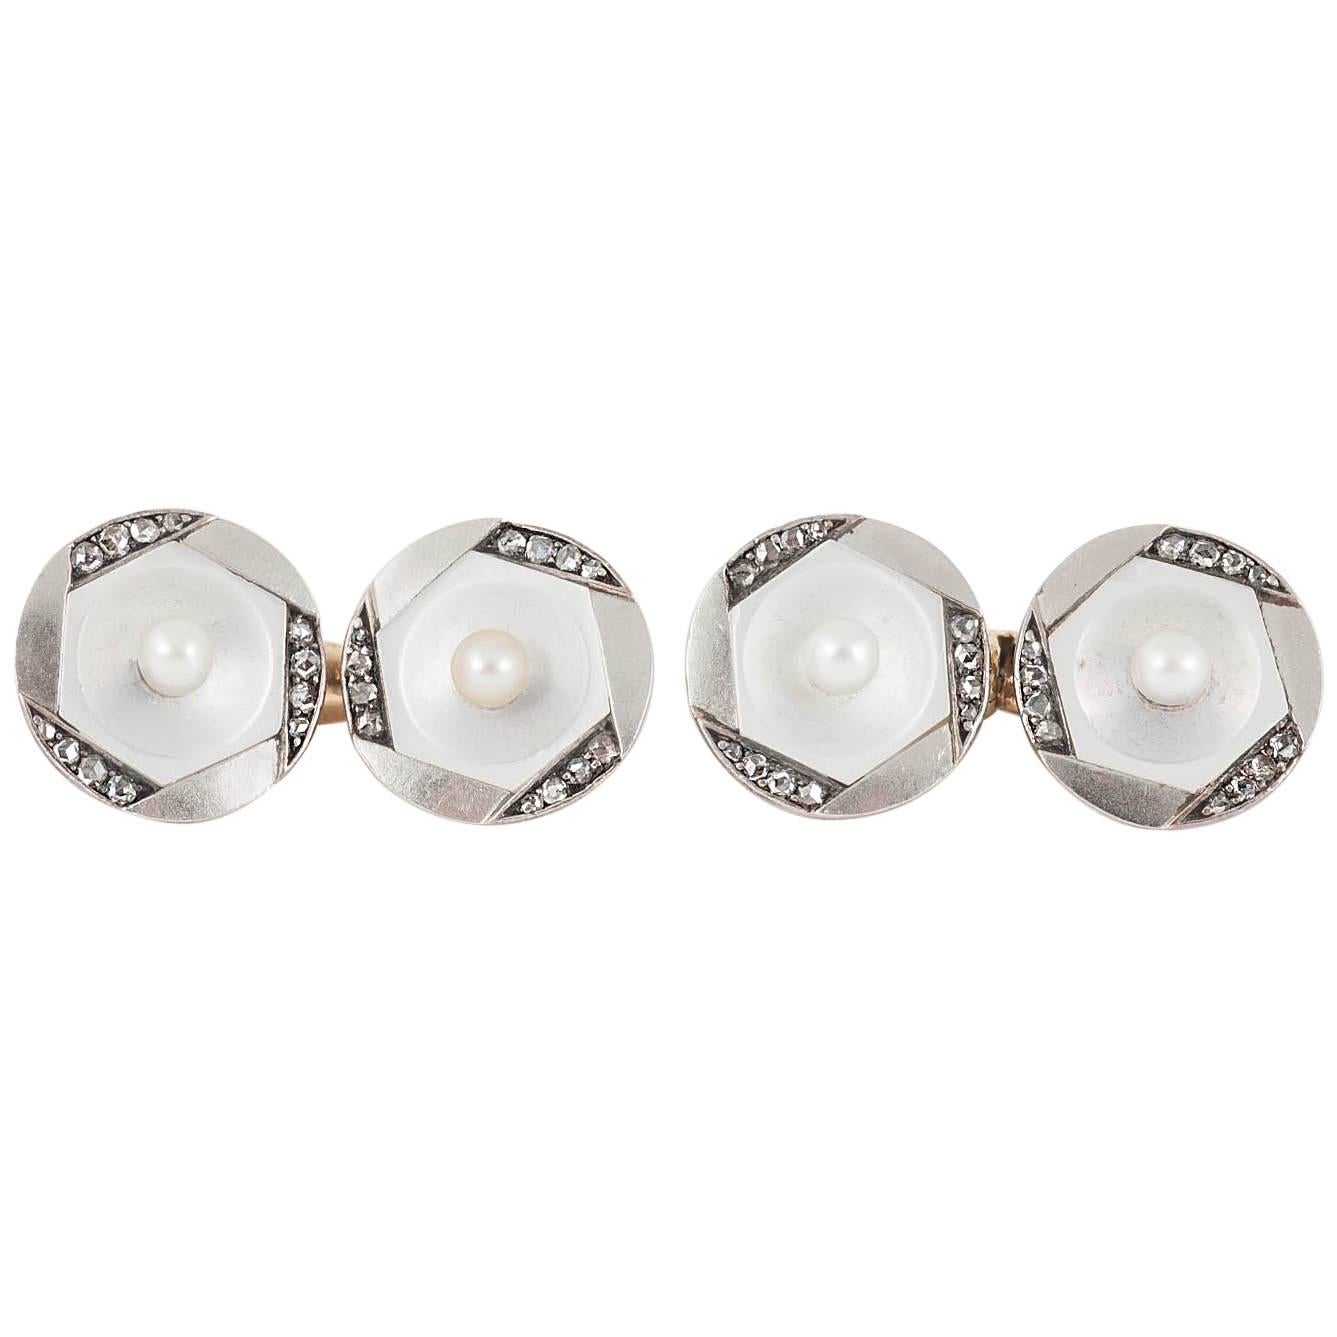  Austrian Diamond, Mother-of-Pearl, Natural Pearl Cufflinks, c, 1900 For Sale